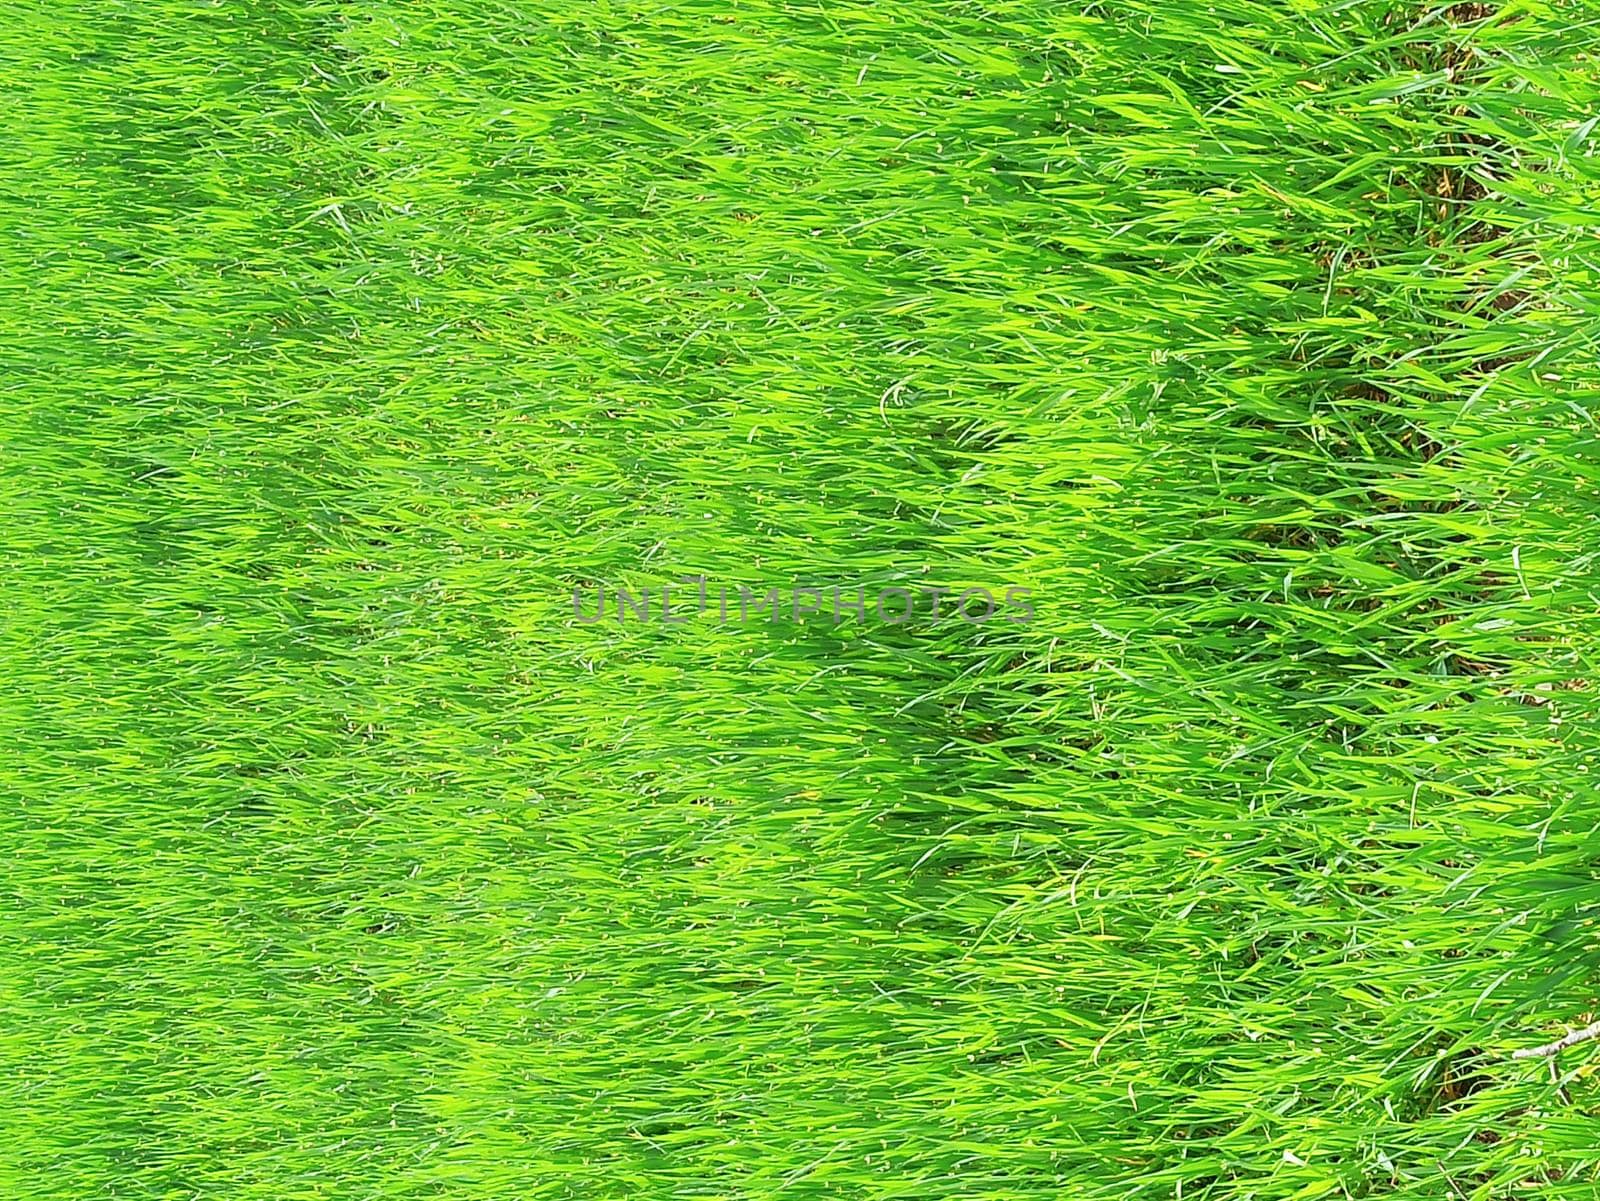 Green grass. Background out of focus, blurry.